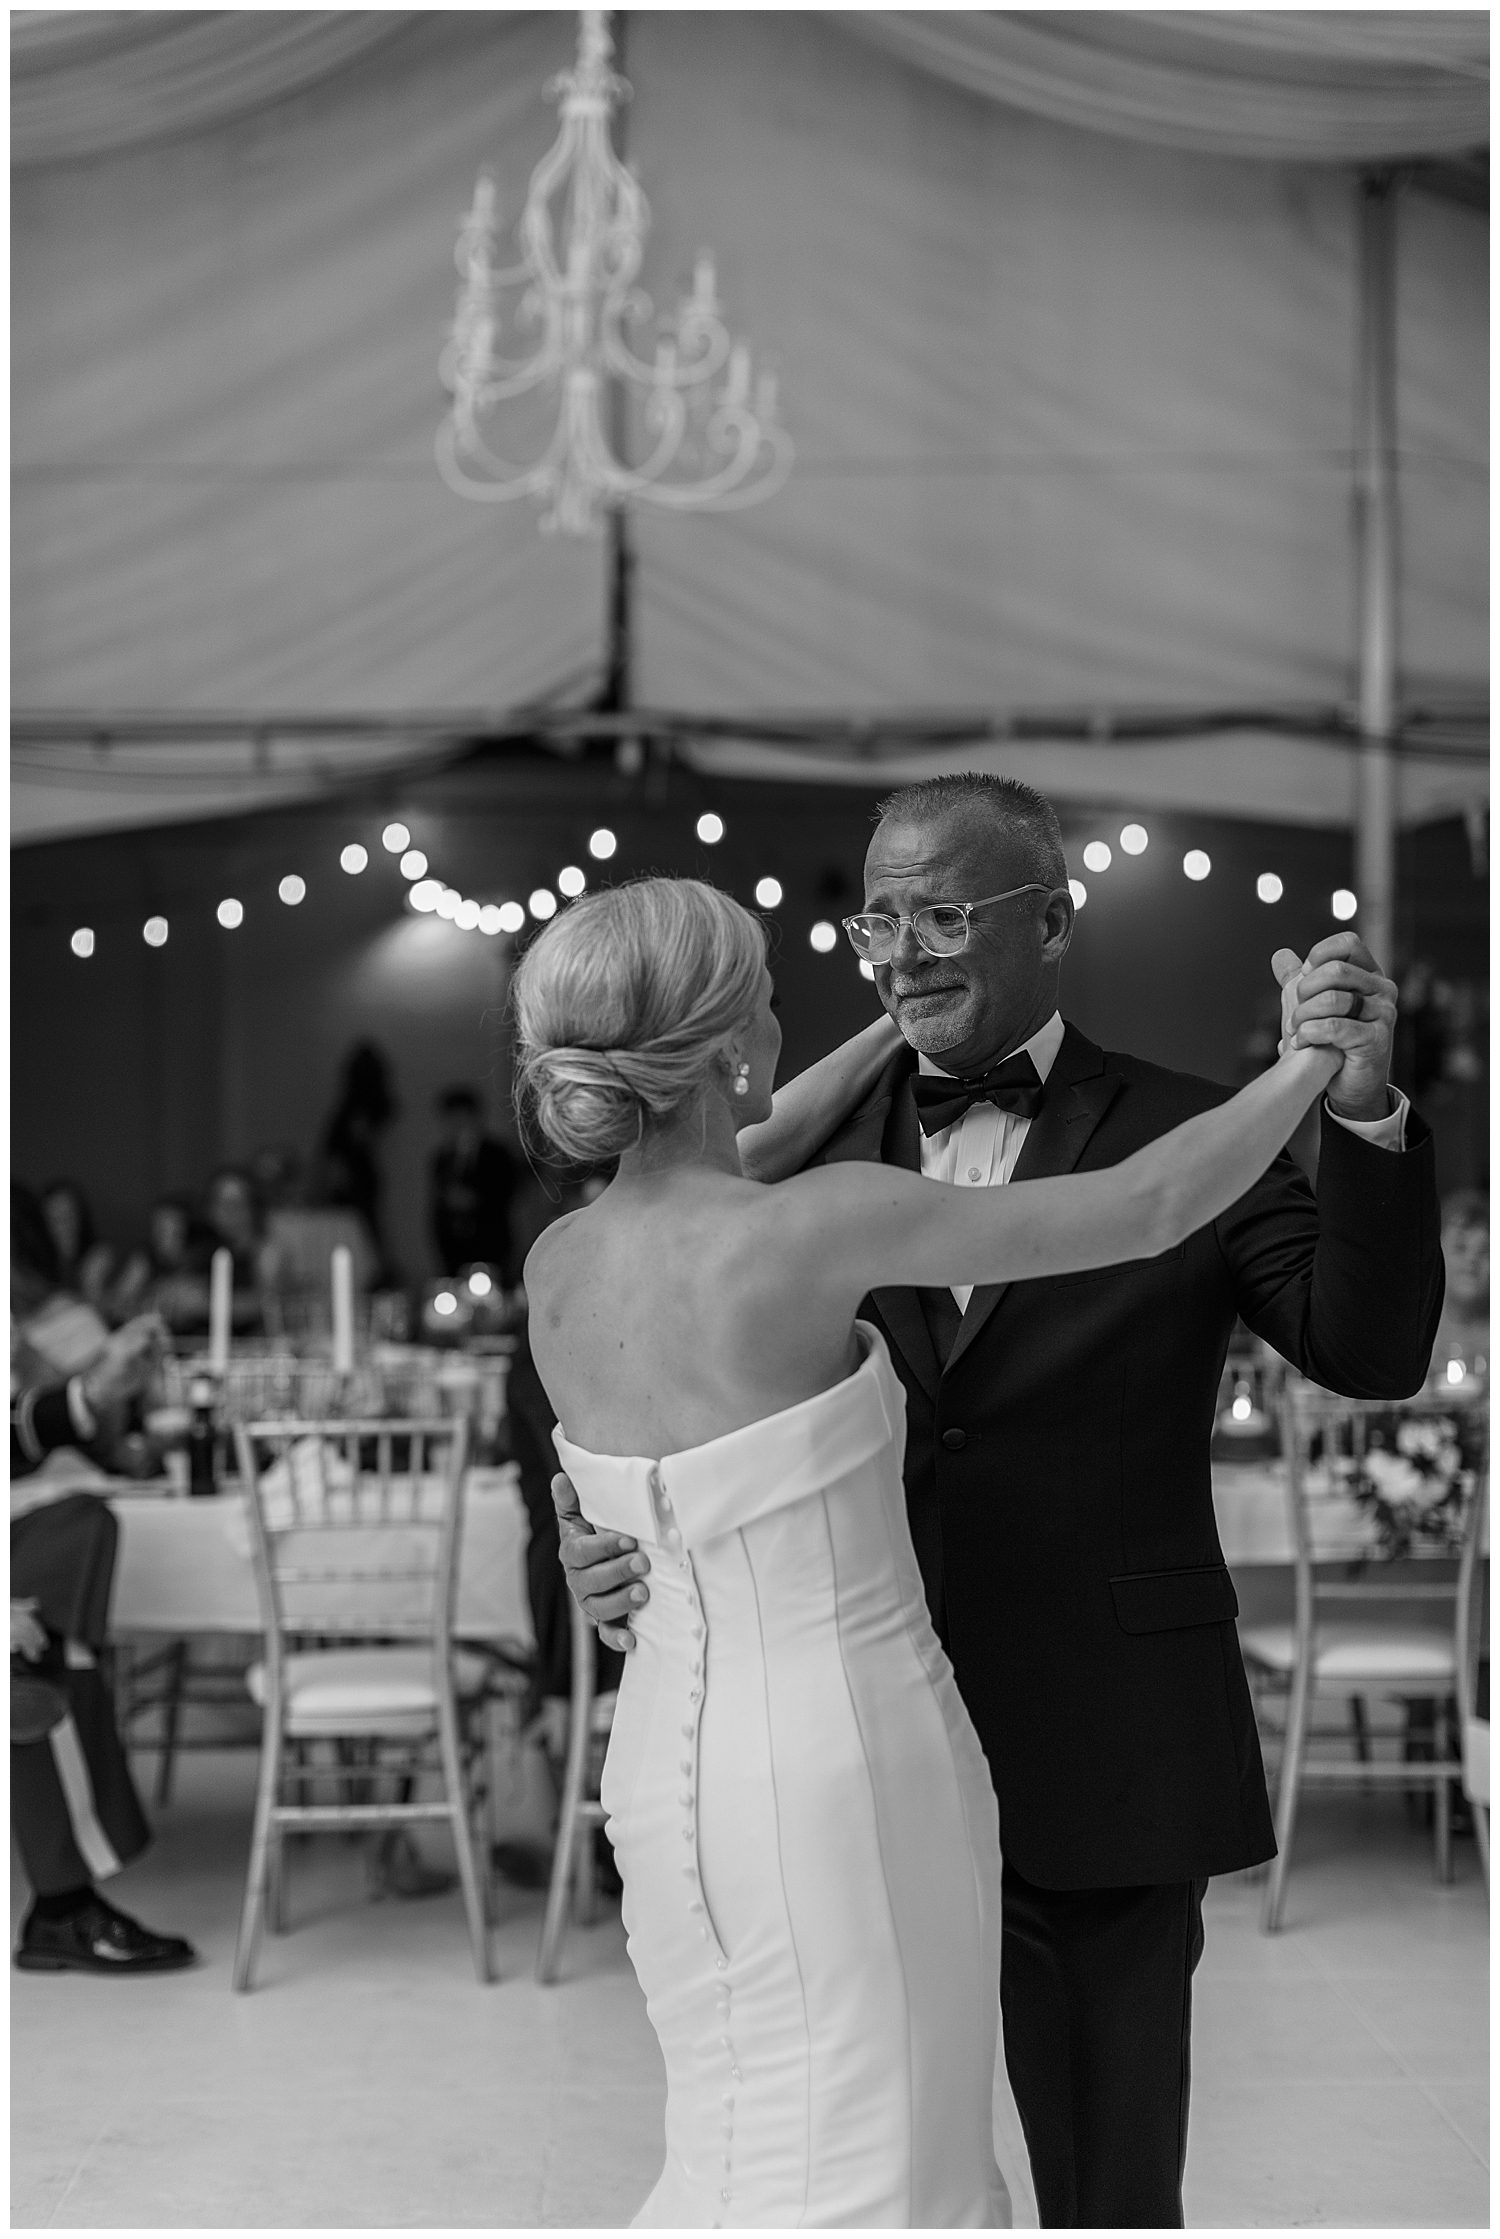 A bride dances with her father for the first time as a wife.